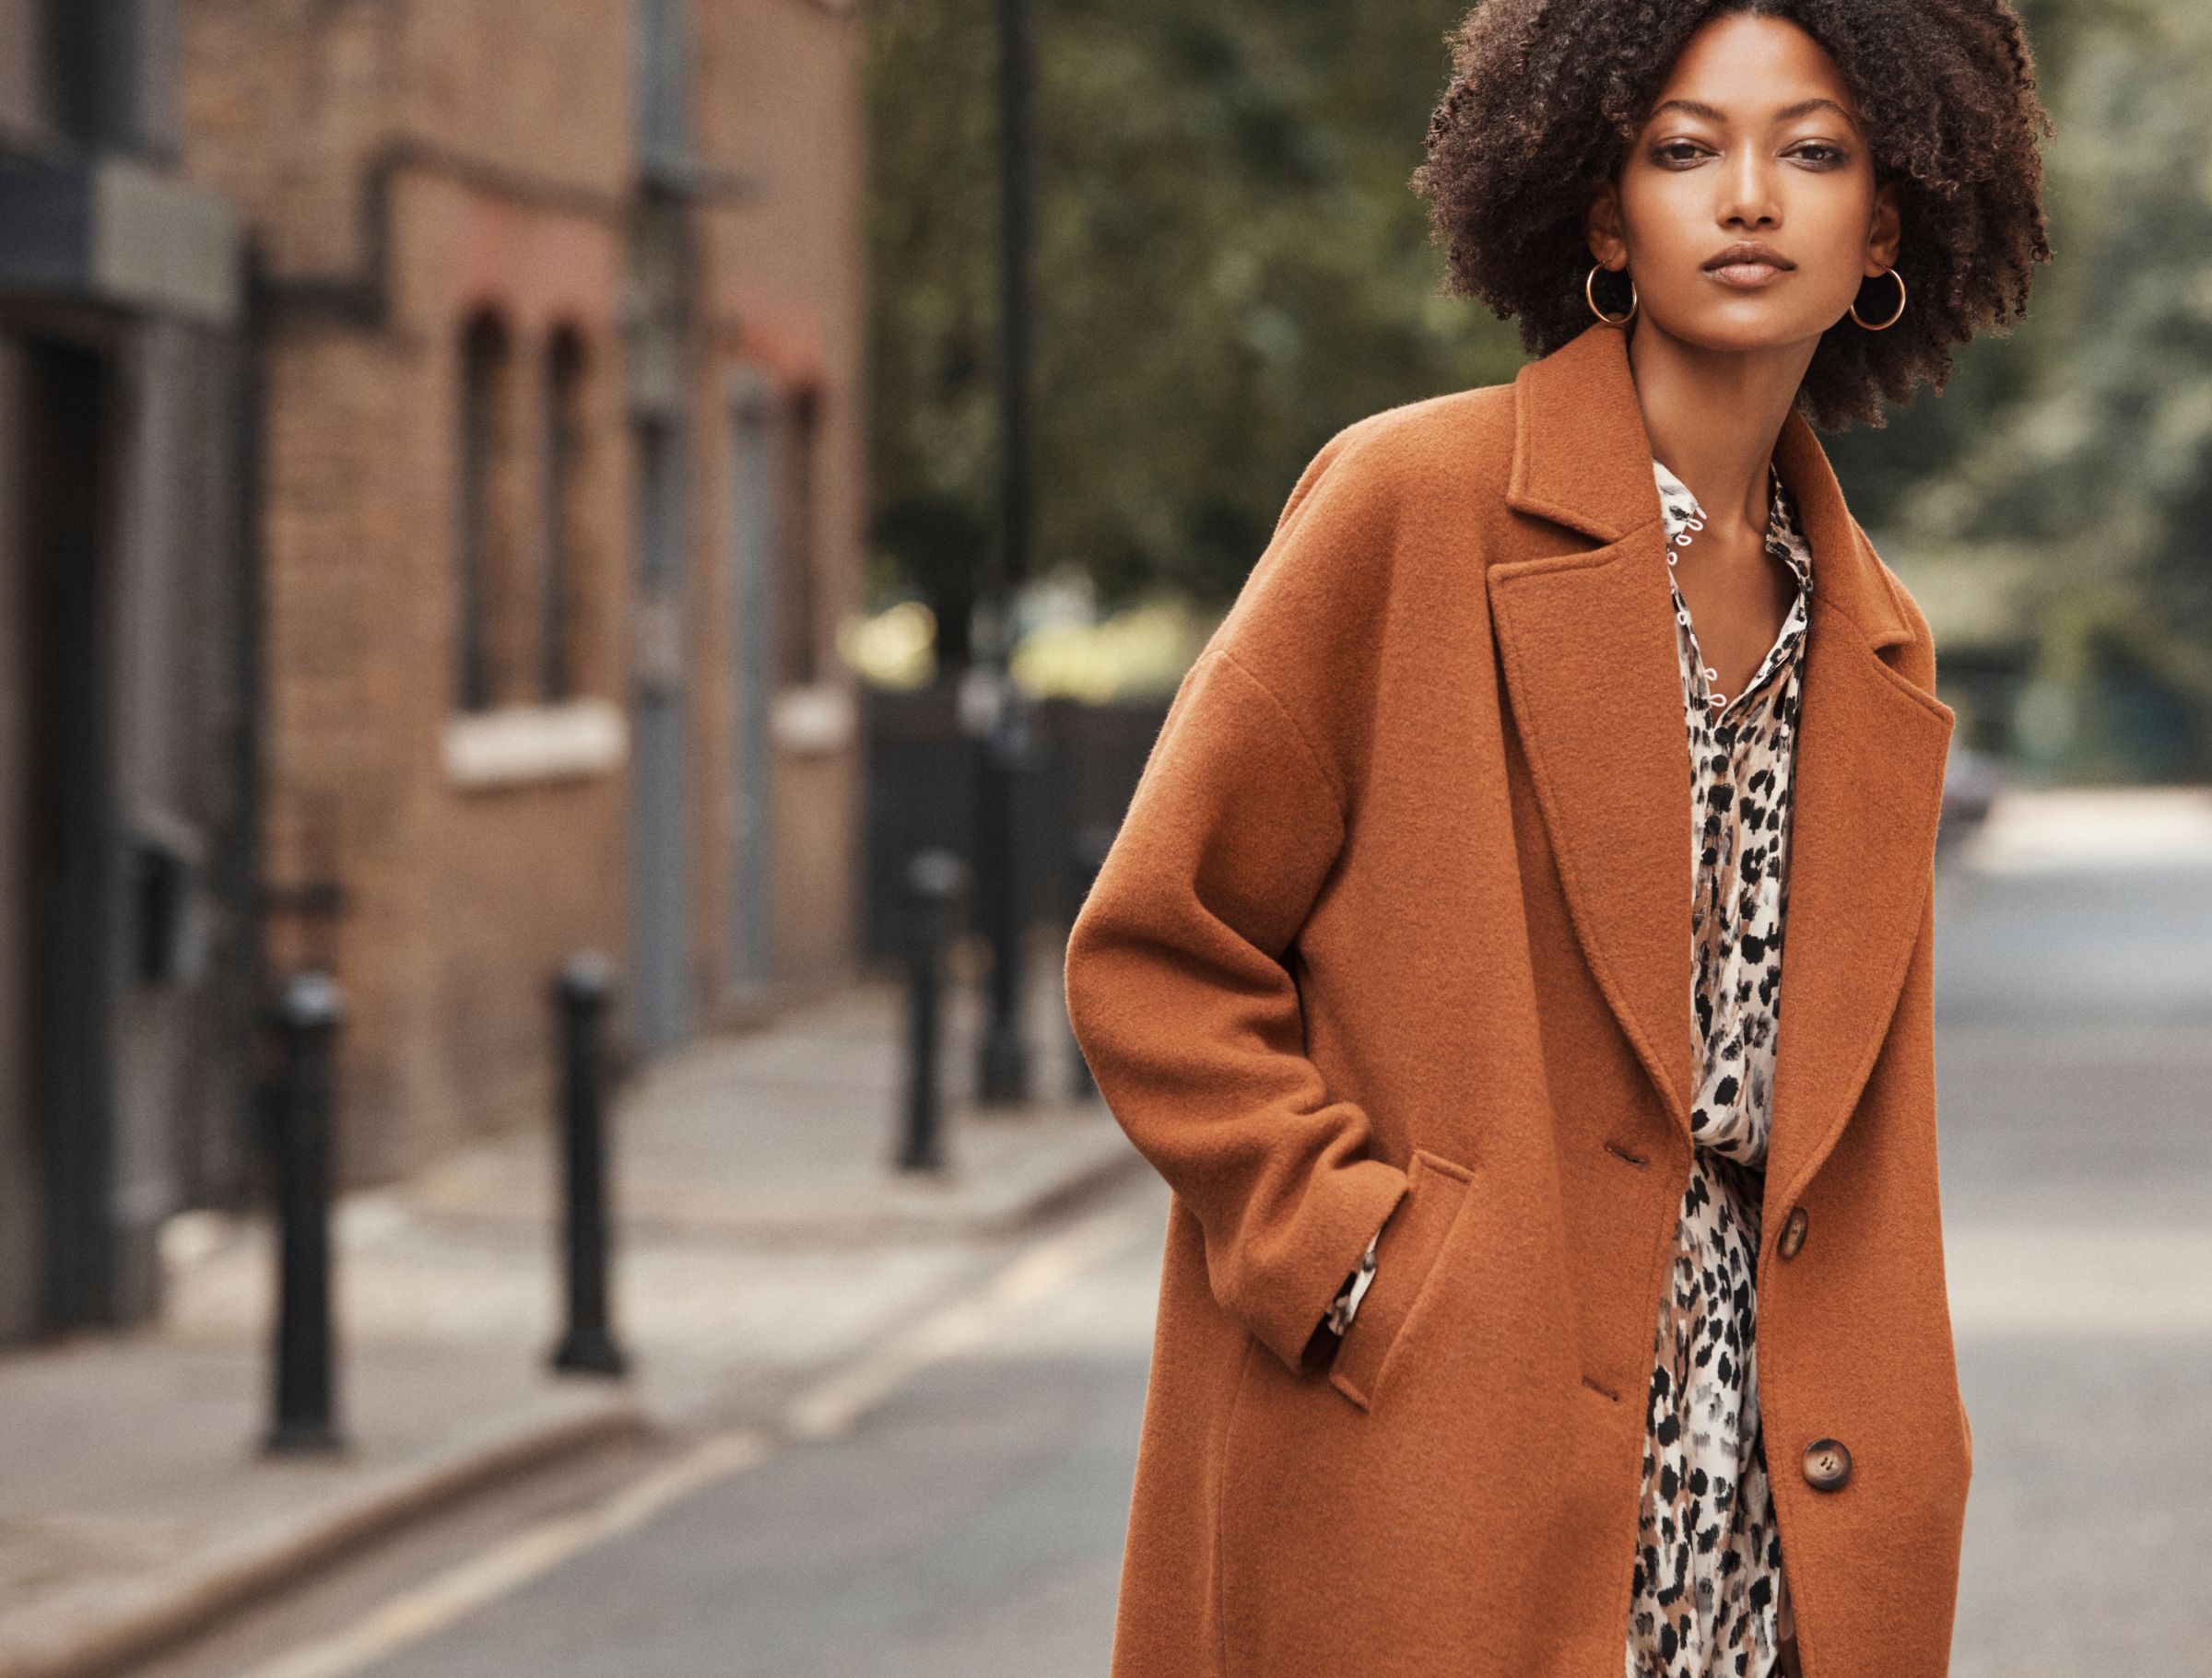 A fashion editor’s guide to winter coats